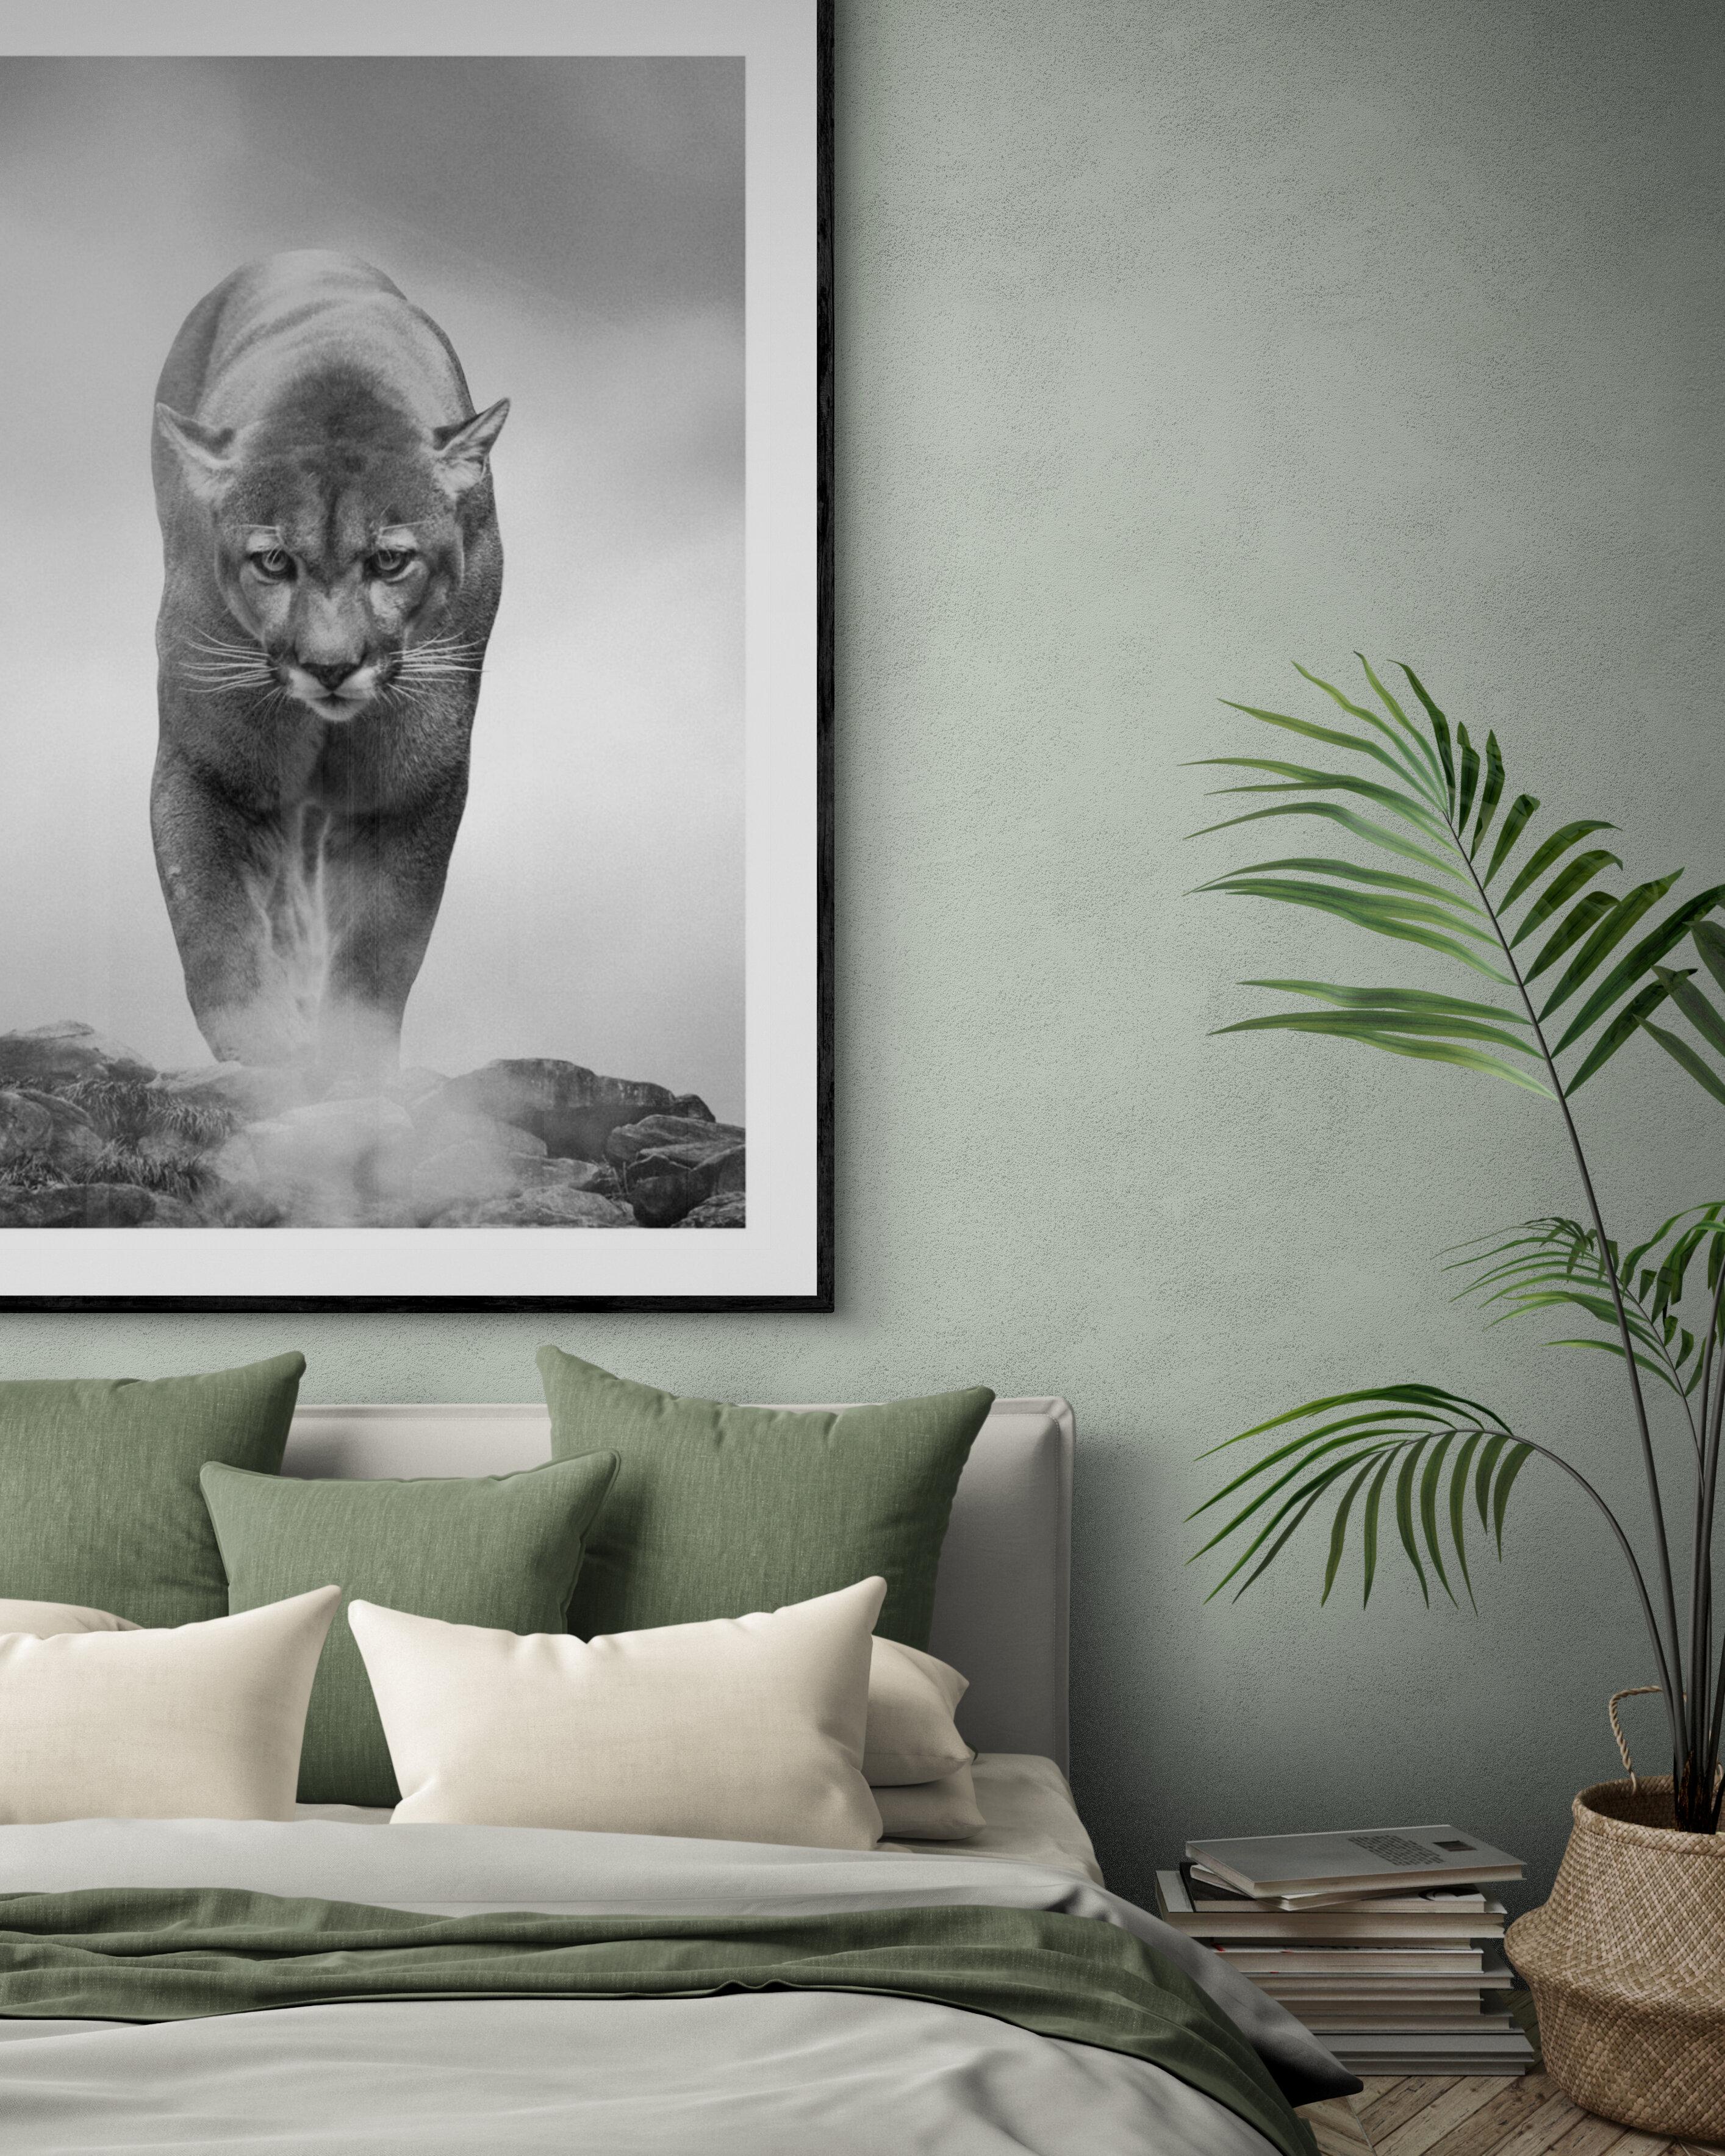  36x48 Black and White Photography, Cougar Photograph, Mountain Lion Art 3